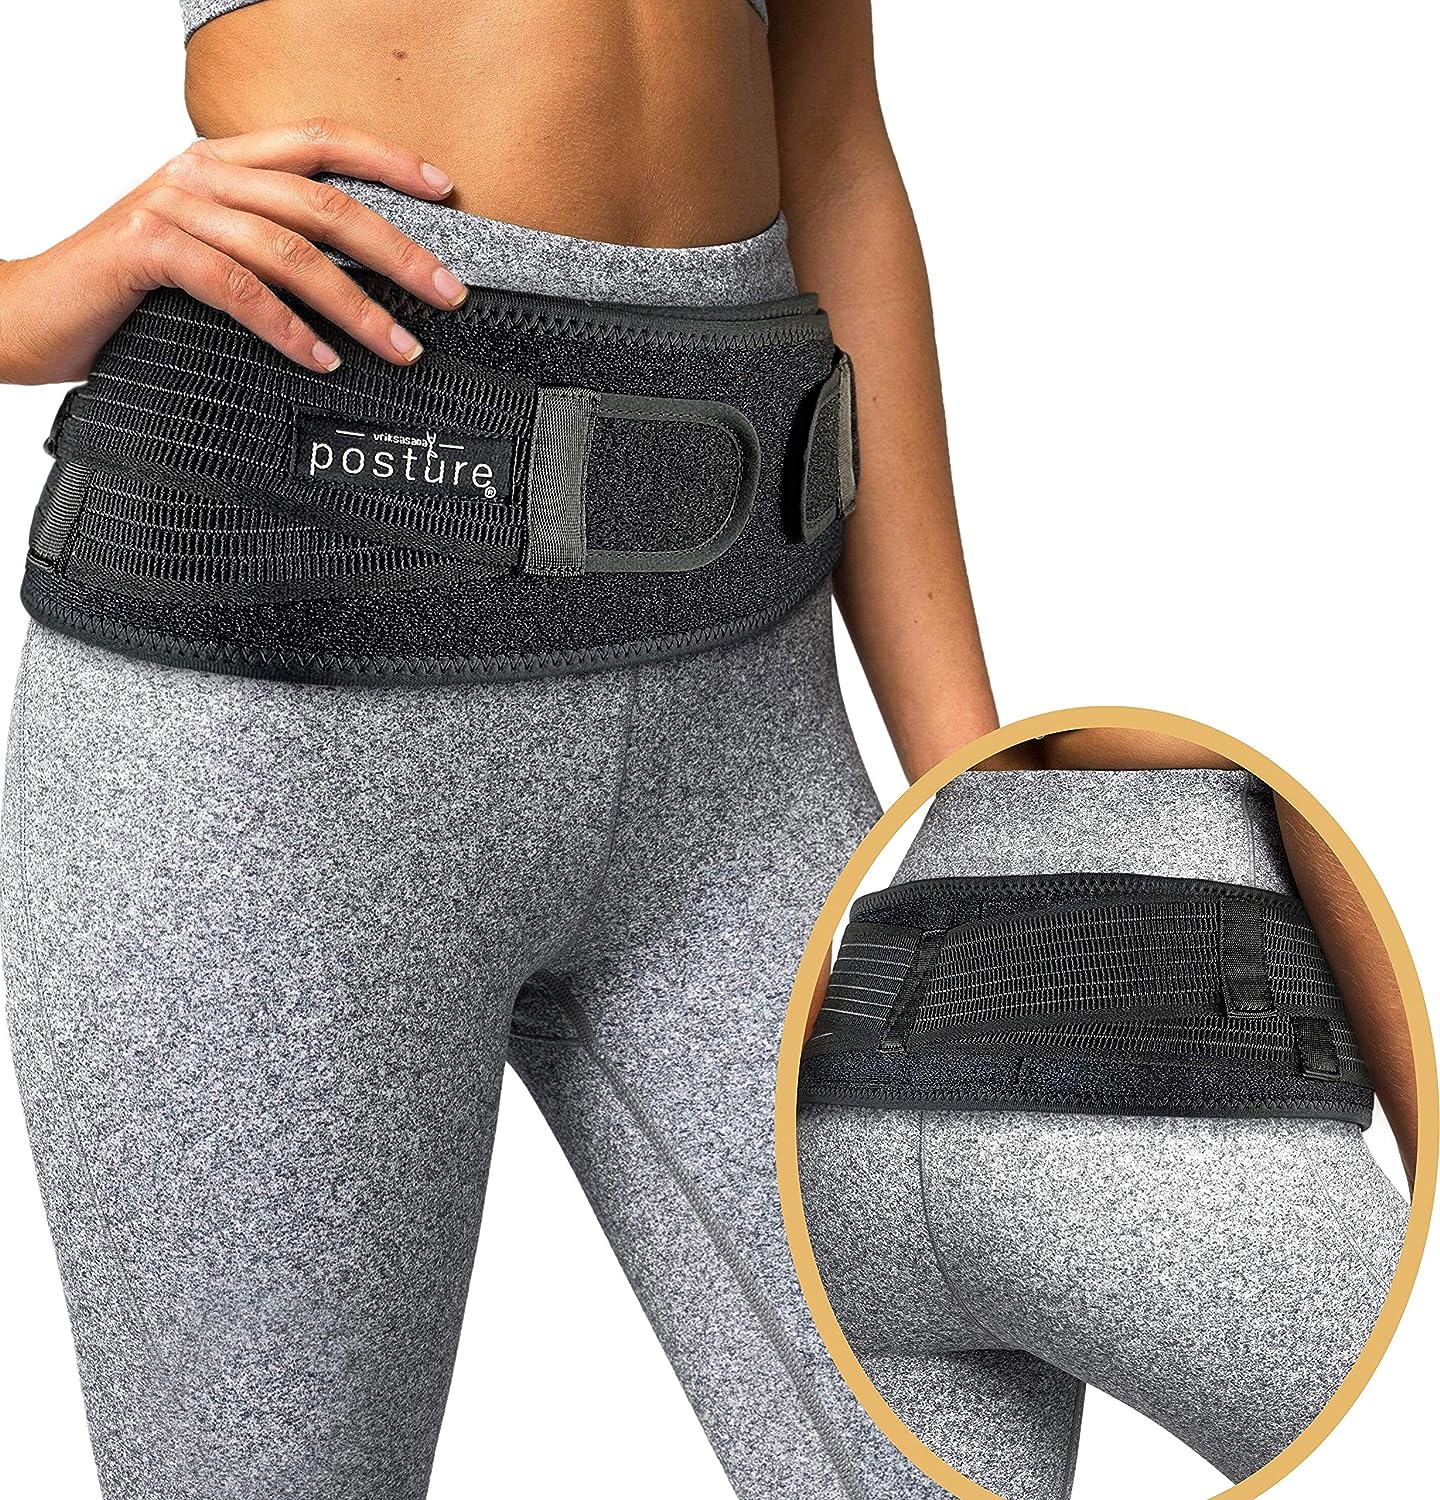 hip belt for back pain recommended by chiropractors for chronic back pain while flying